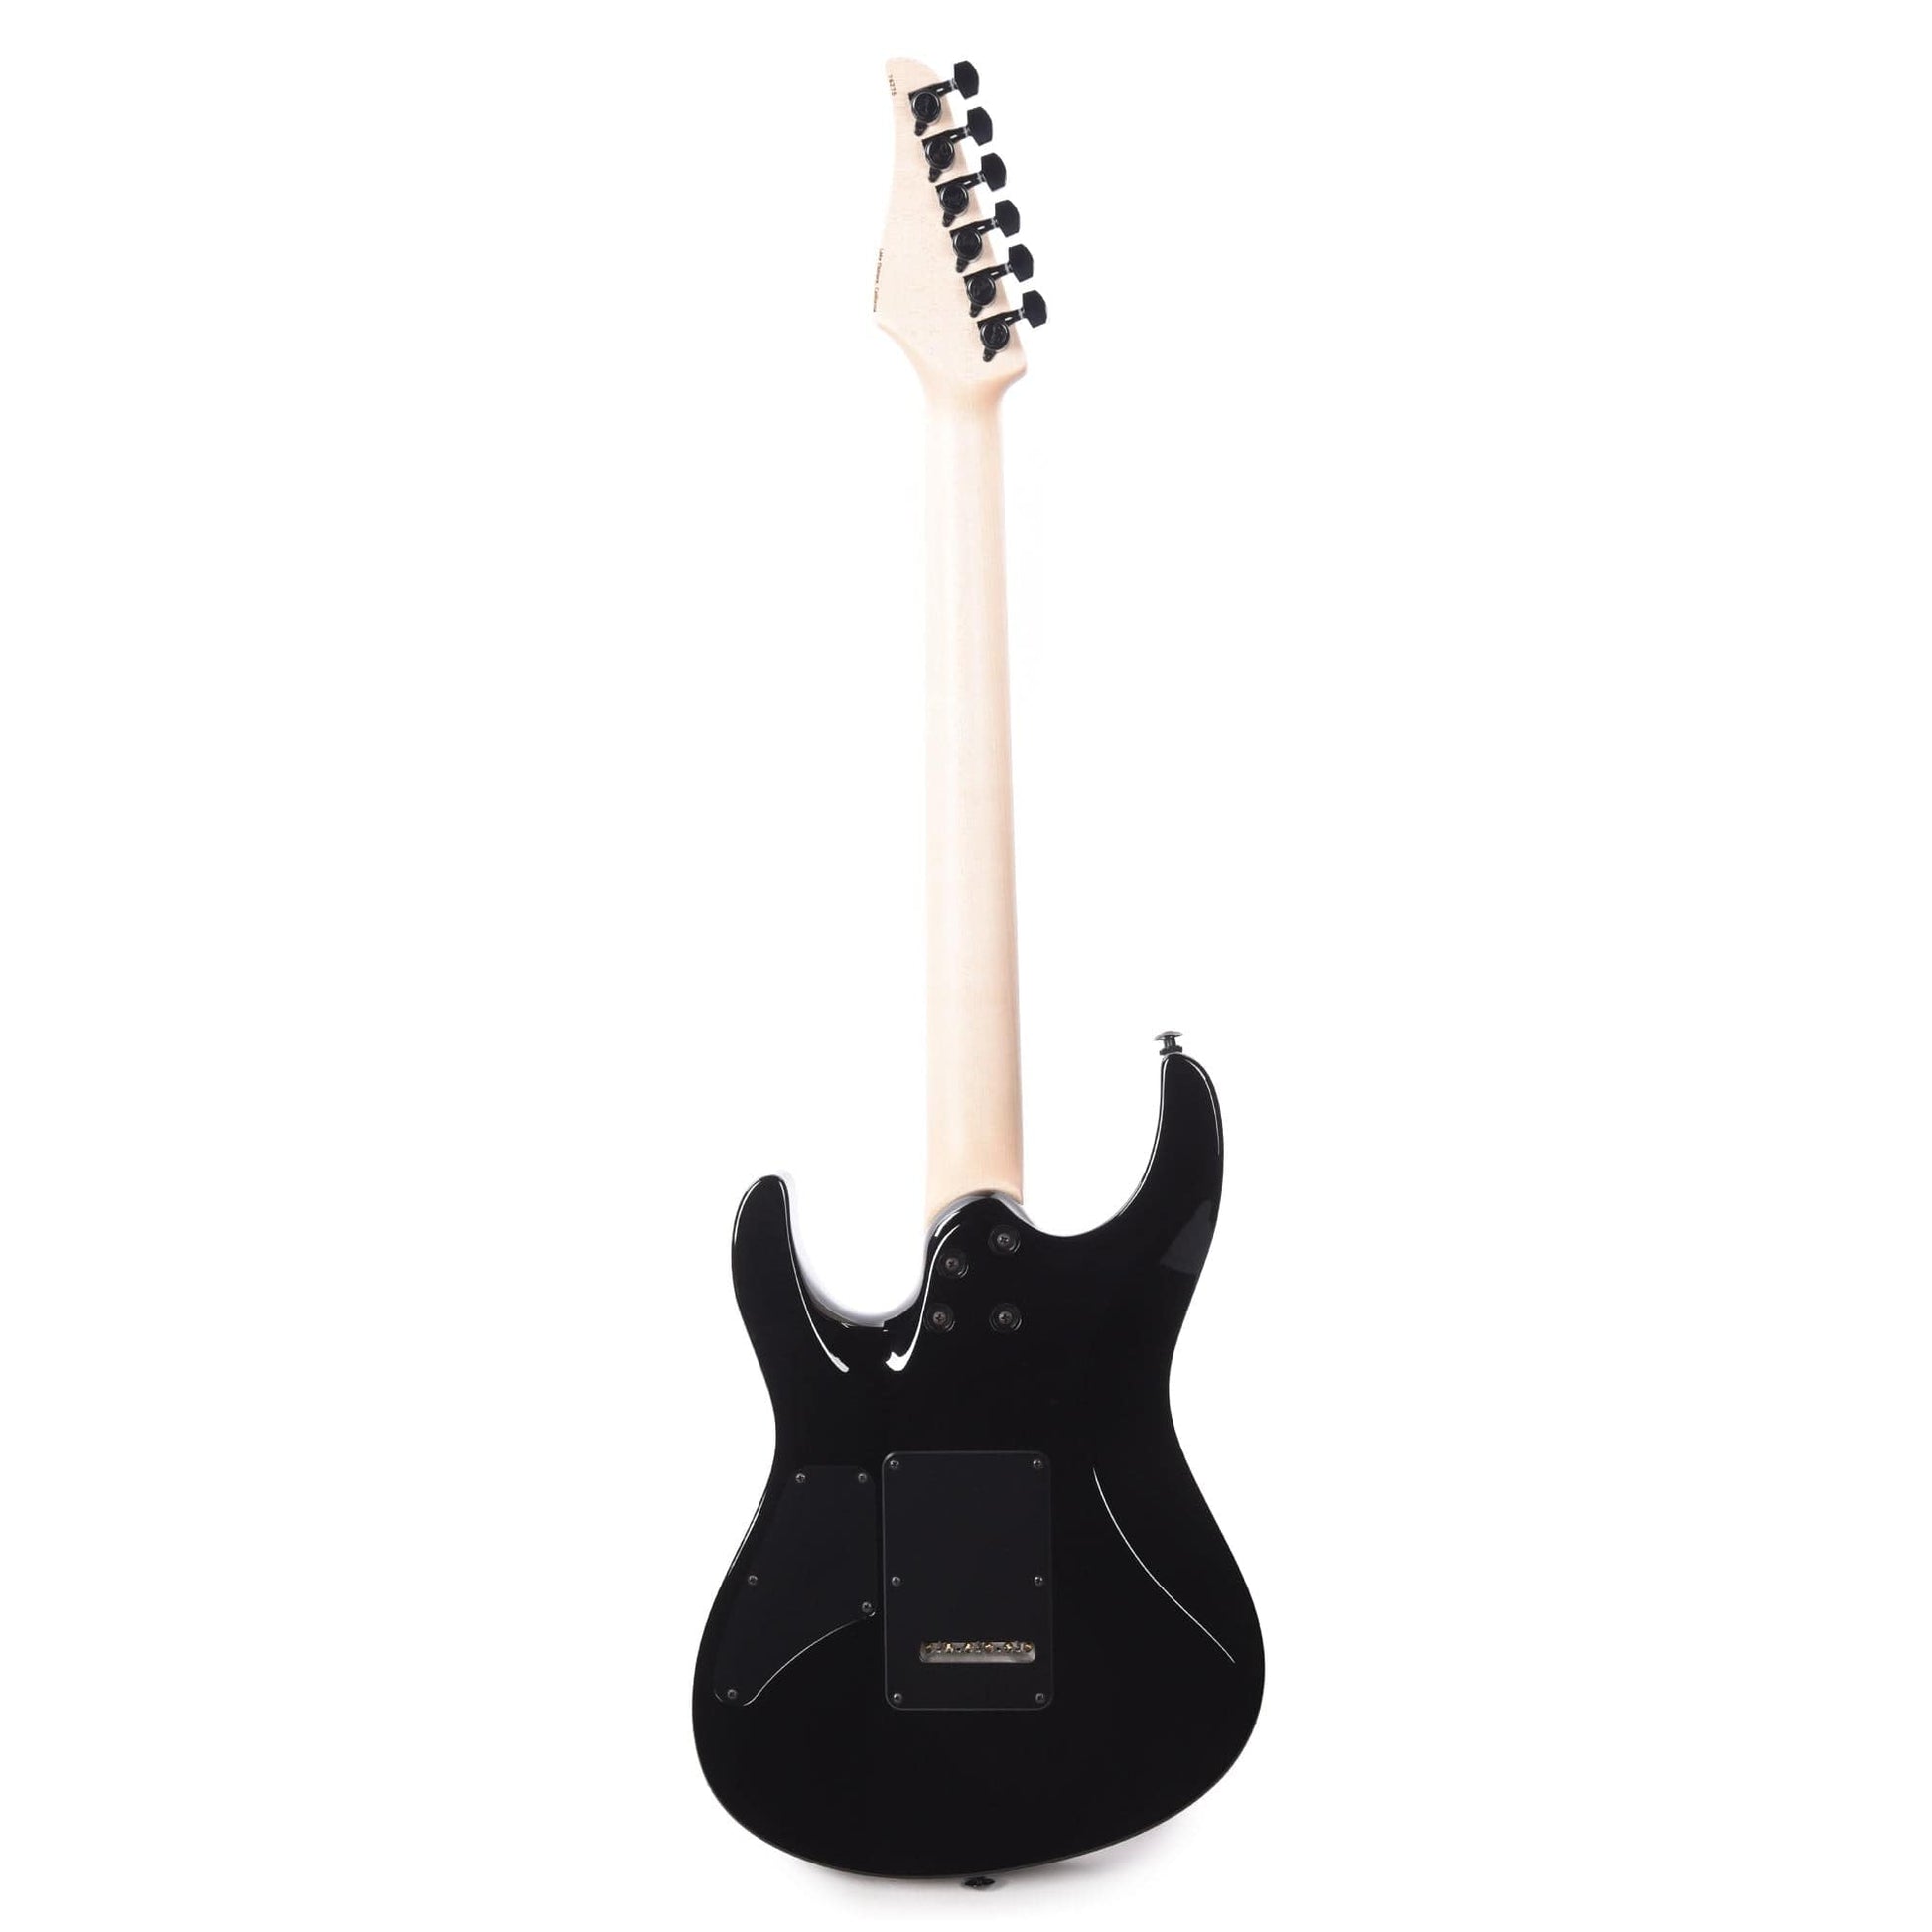 (Serial #76275) Electric Guitars / Solid Body